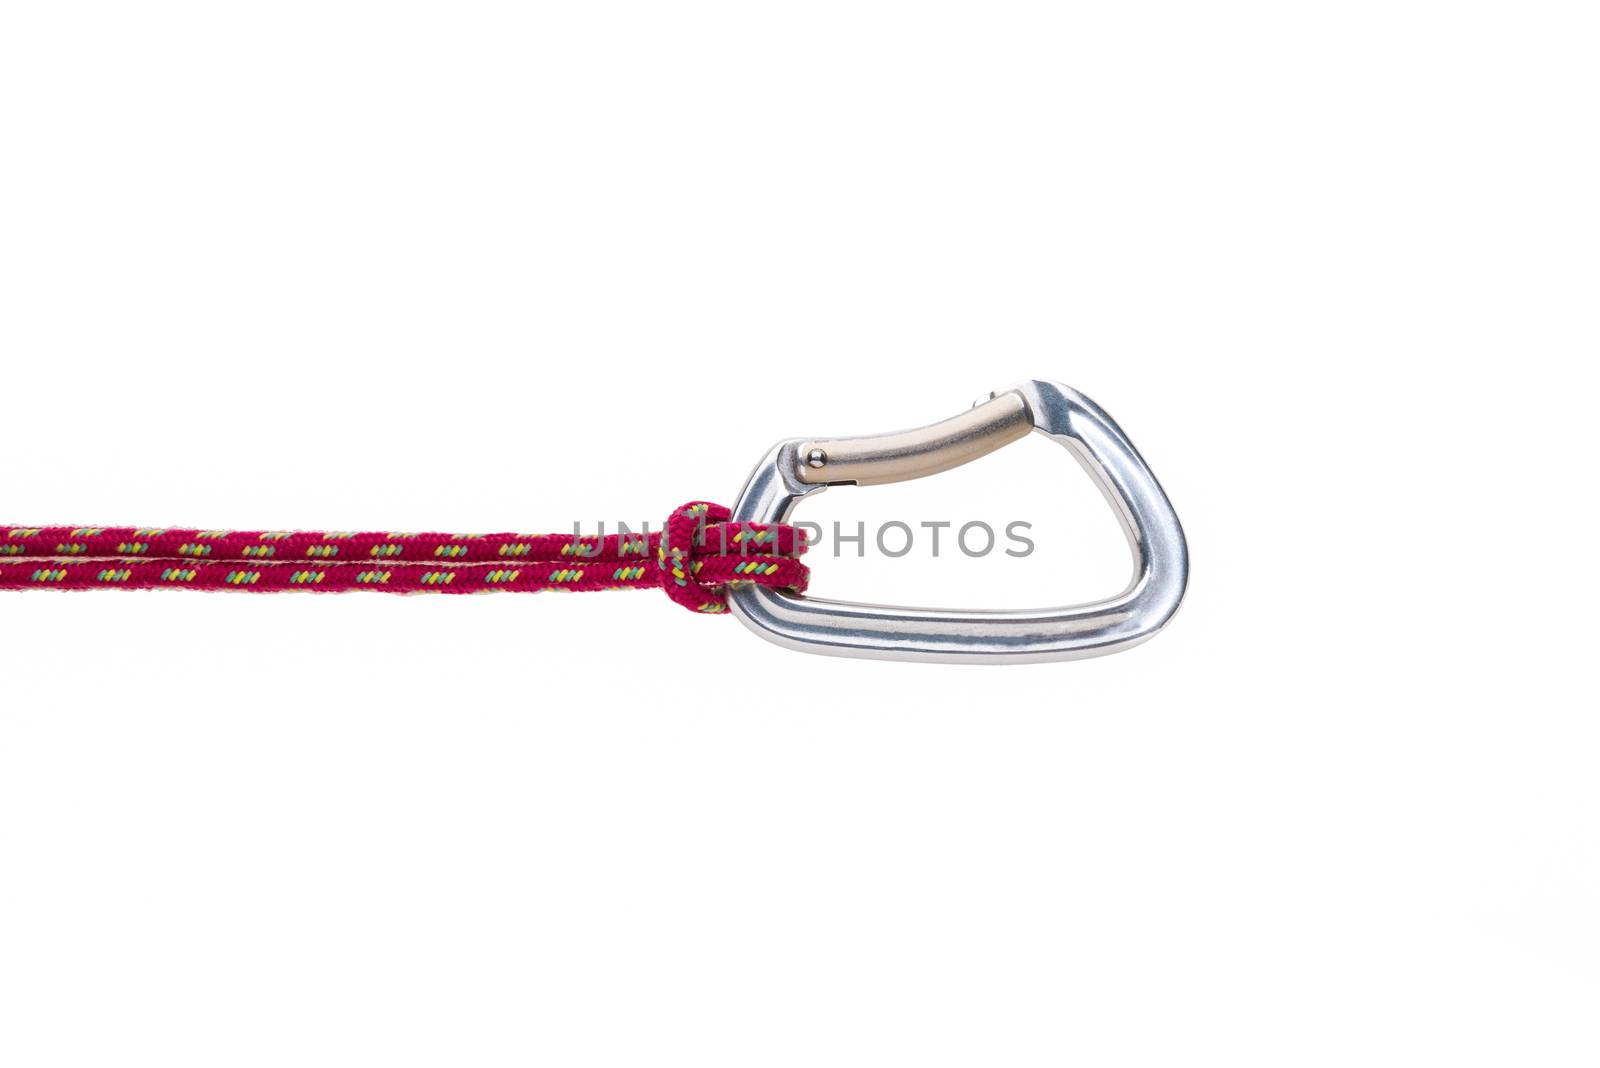 Carabiner with rope isolated against white background.